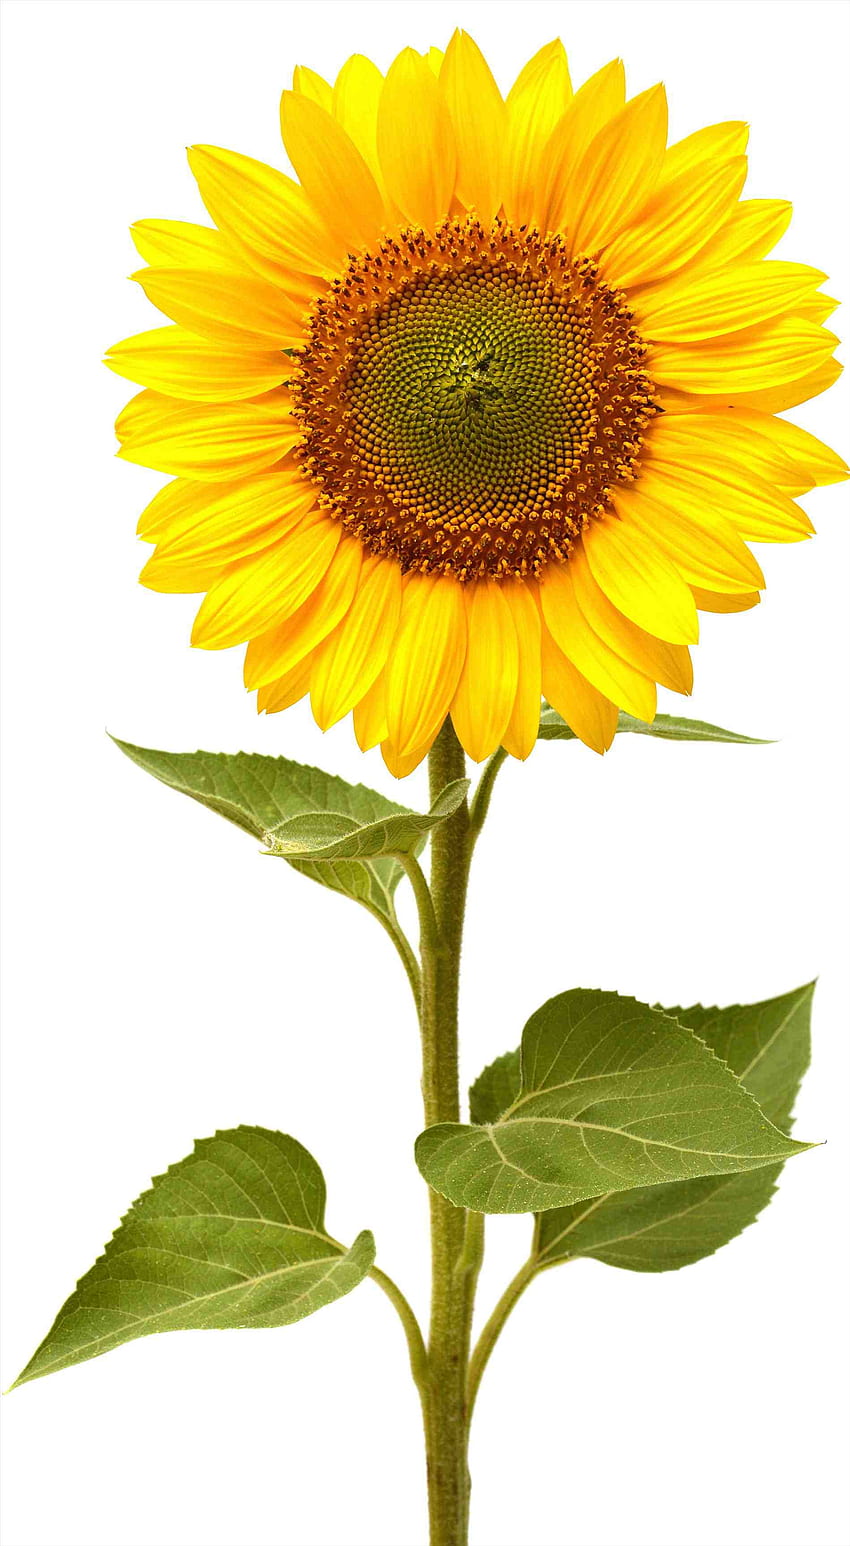 How to Draw a Sunflower in 8 Easy Steps - AZ Animals